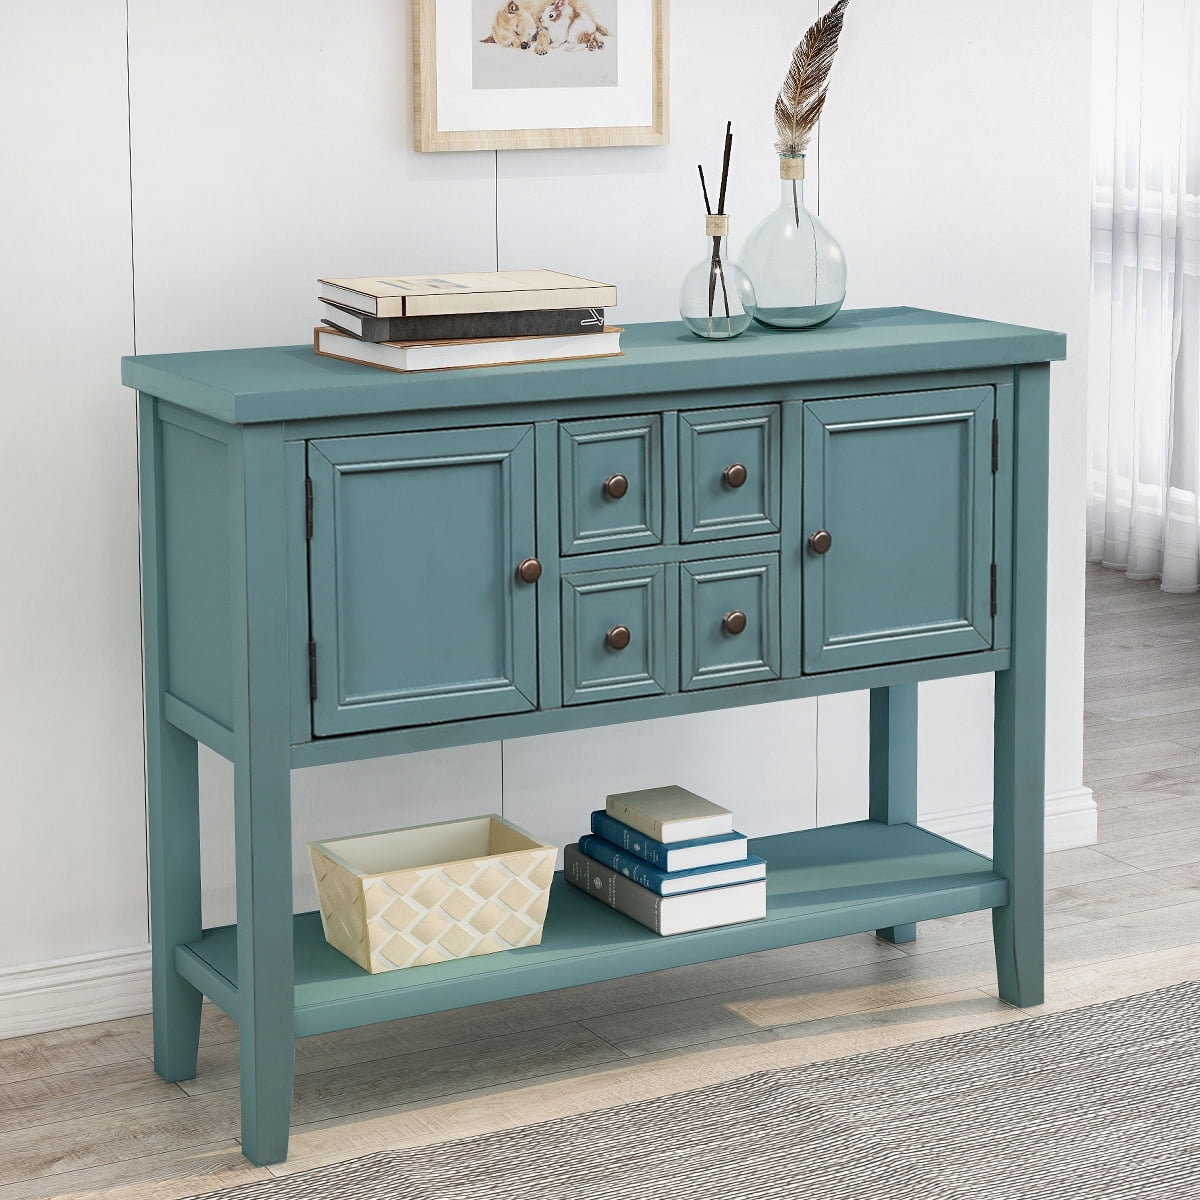 Details about   Sideboard Buffet Table Wooden Console Table W/ Drawer & Cabinet Organizer Storge 